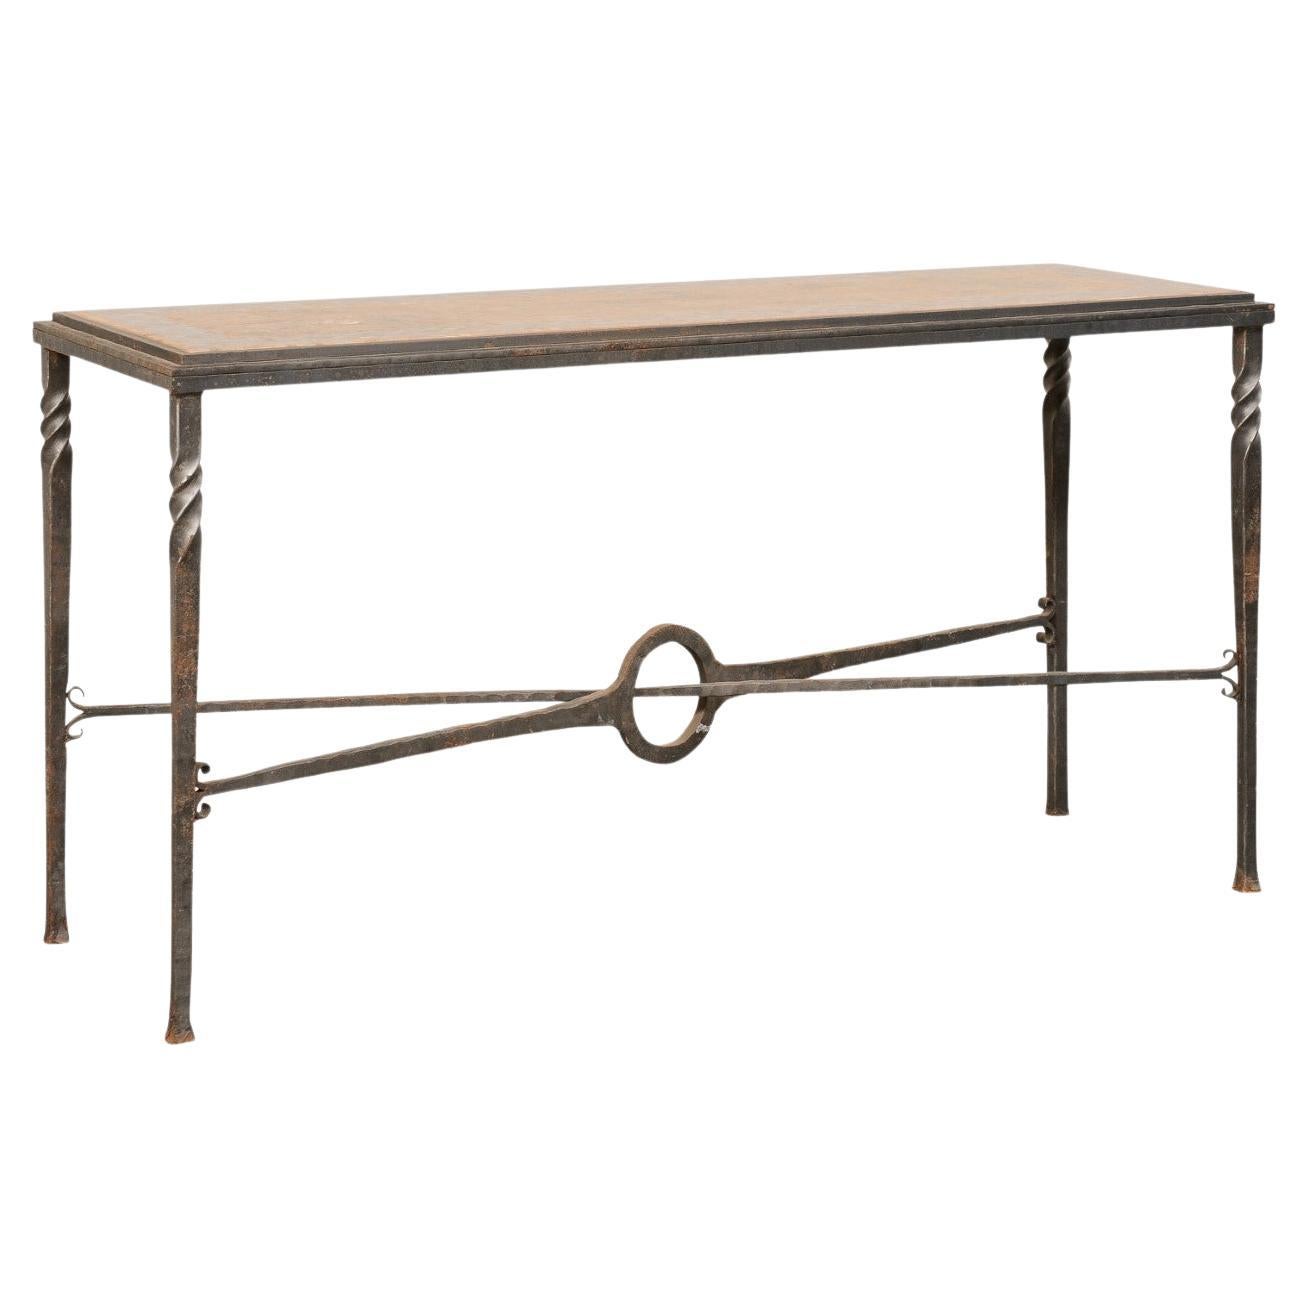 Beautiful Mosaic Stone Top Console Table W/Iron Base & Pass-Through Stretcher